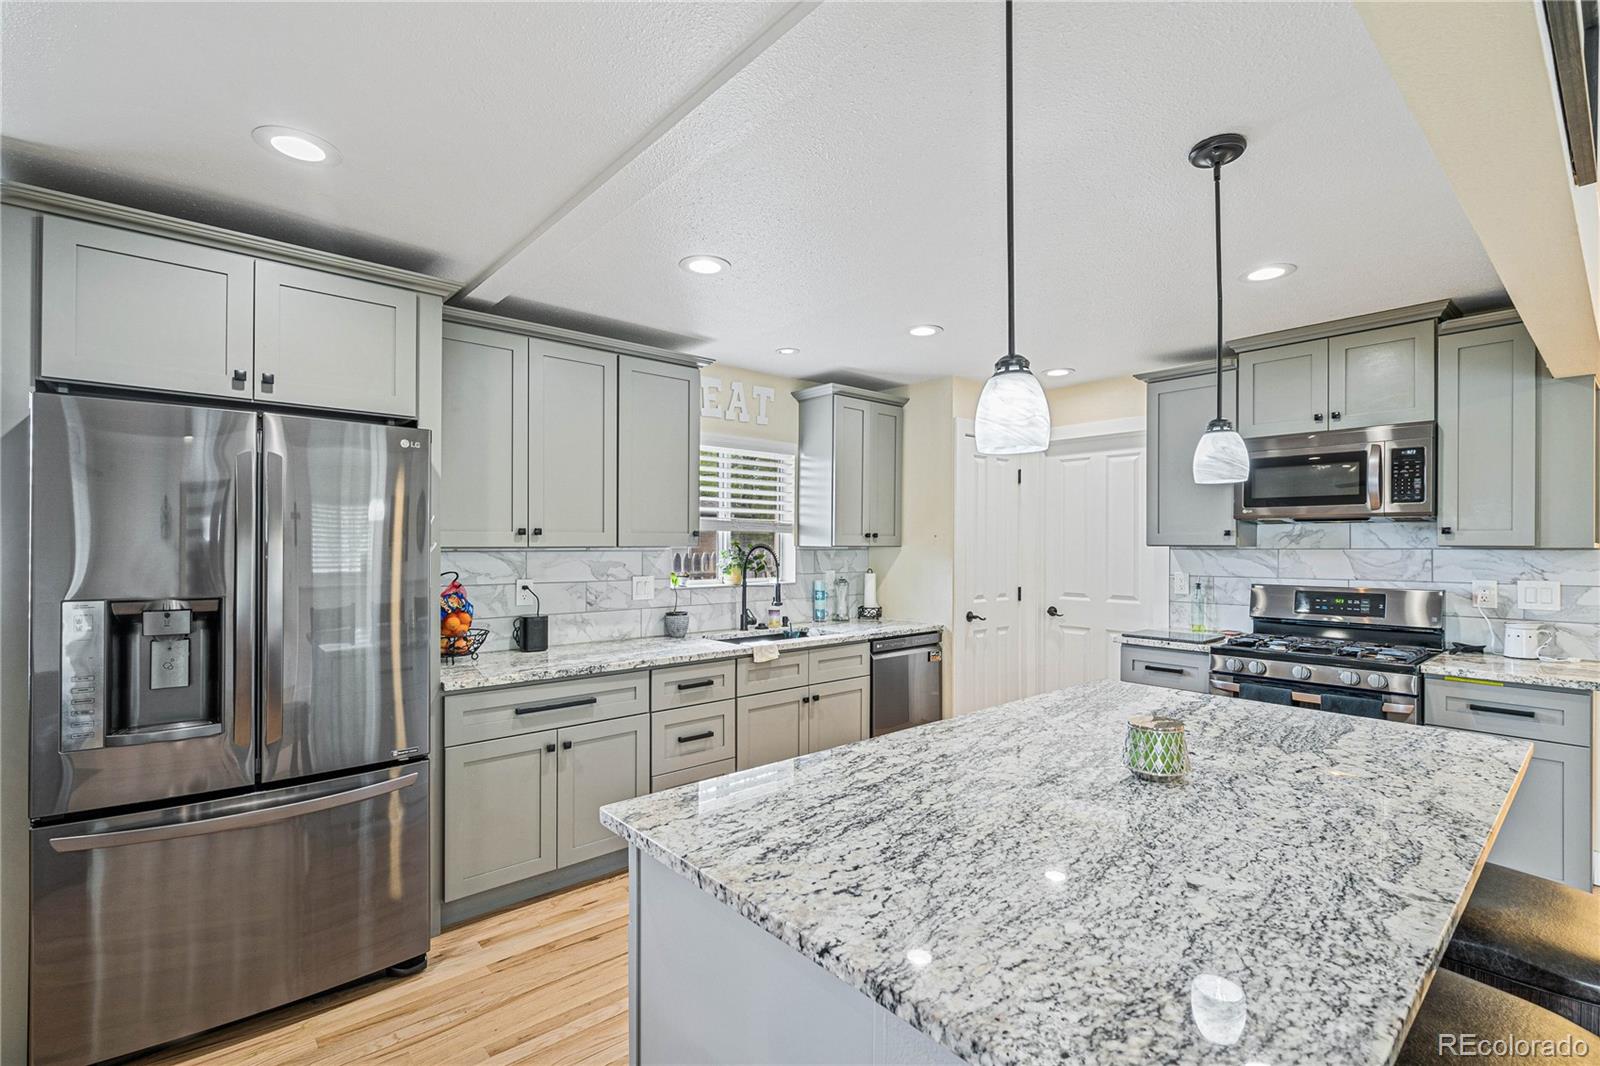 a kitchen with stainless steel appliances granite countertop a refrigerator a sink dishwasher a stove top oven a kitchen island and chairs with wooden floor